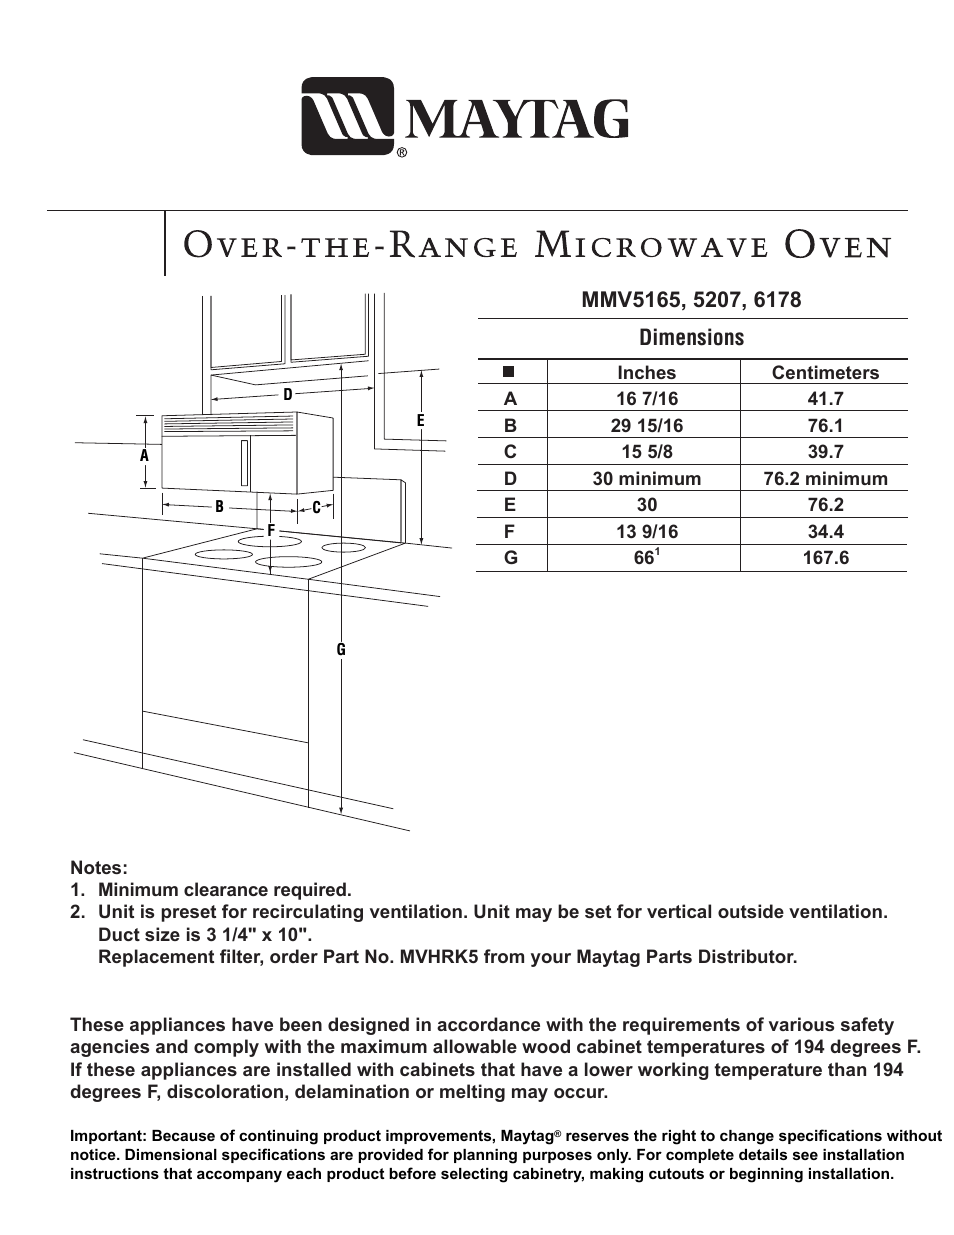 MMV5207AAW Dimension Guide